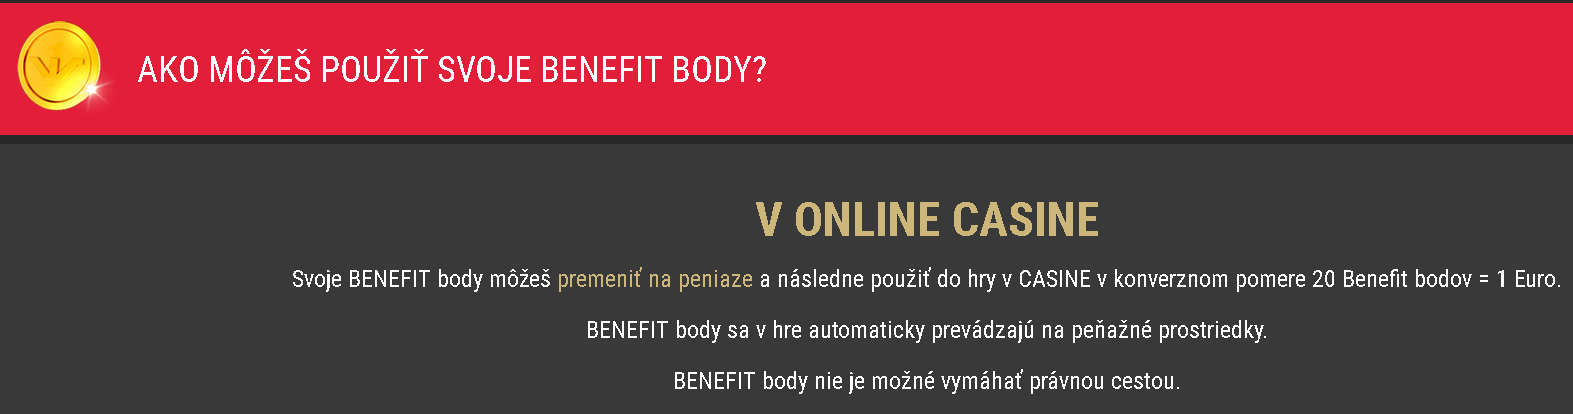 synot benefit body